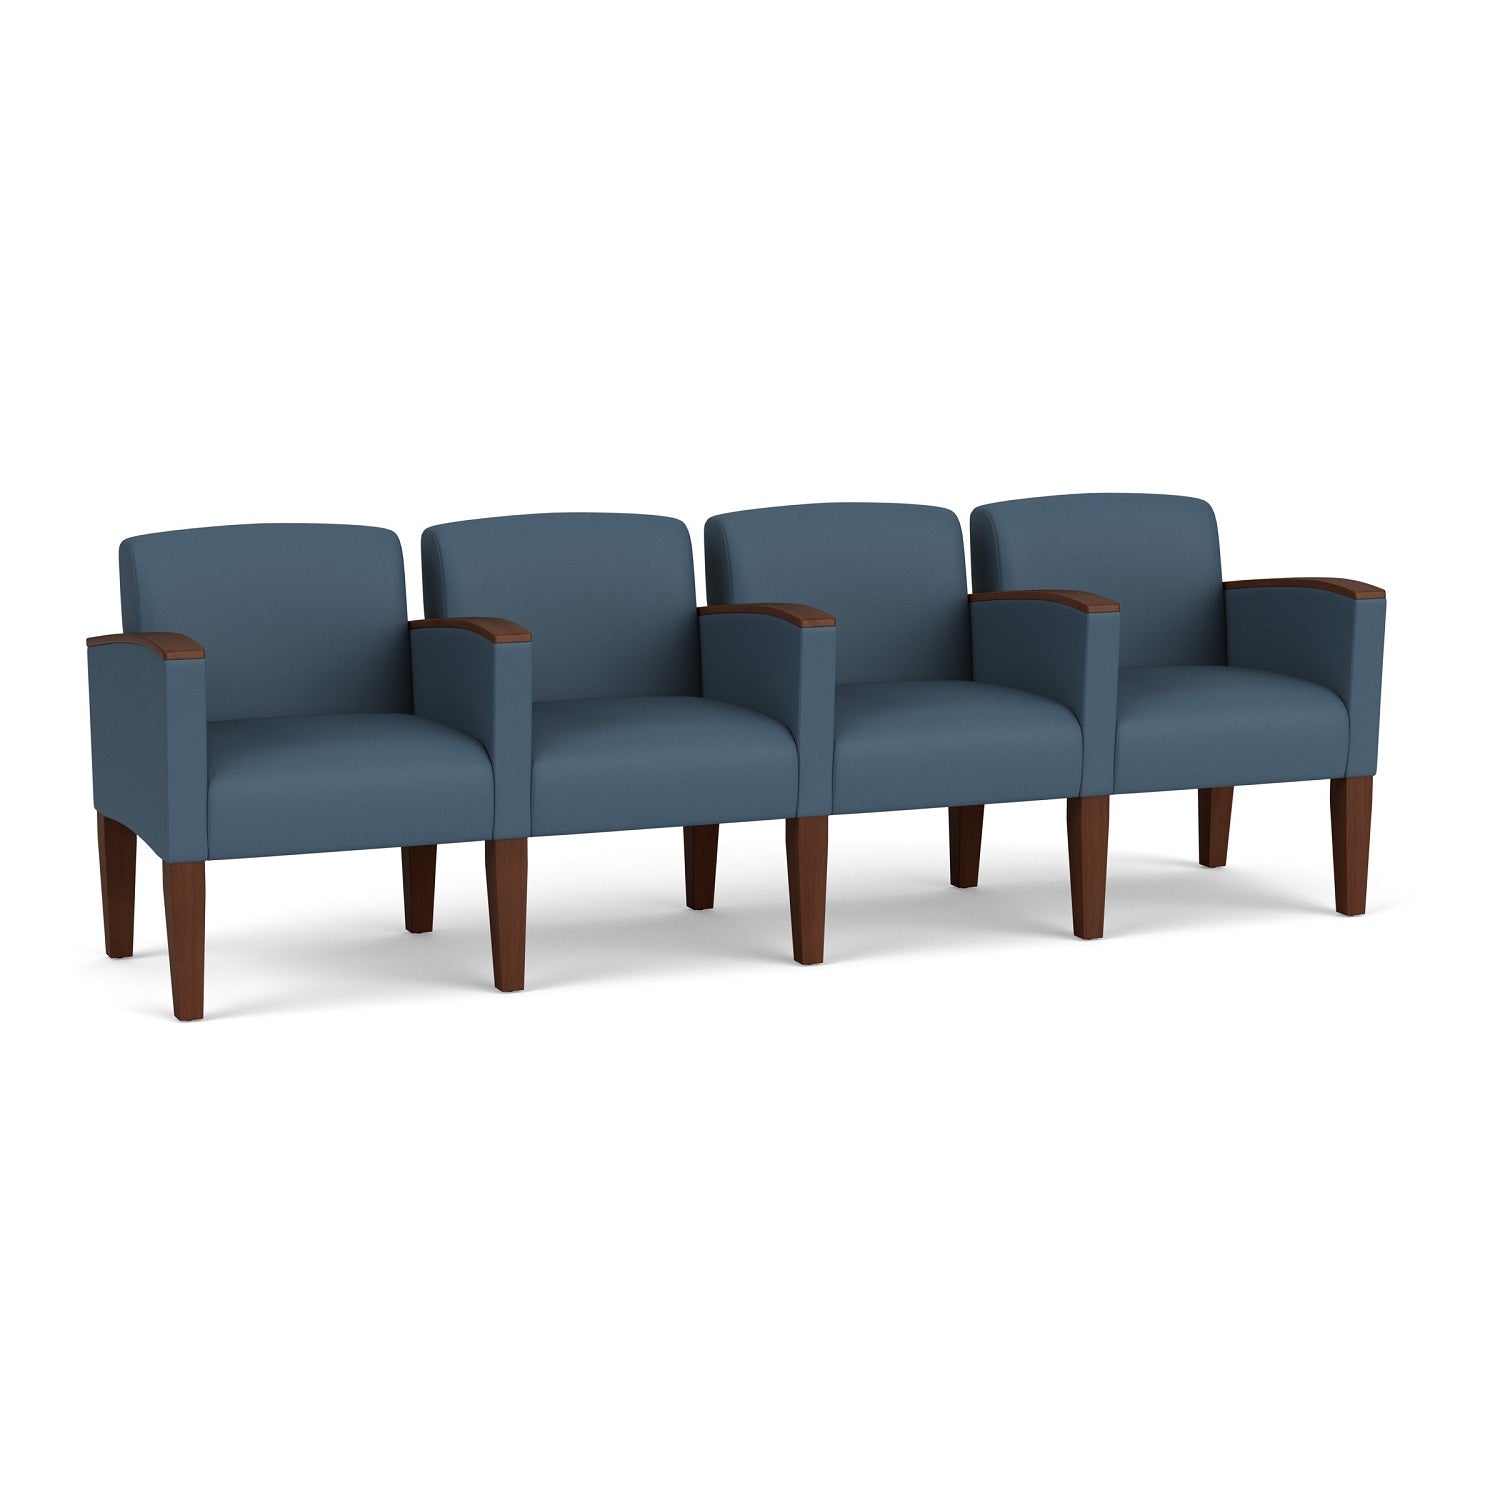 Belmont Collection Reception Seating, 4 Seats with Center Arms, Standard Vinyl Upholstery, FREE SHIPPING